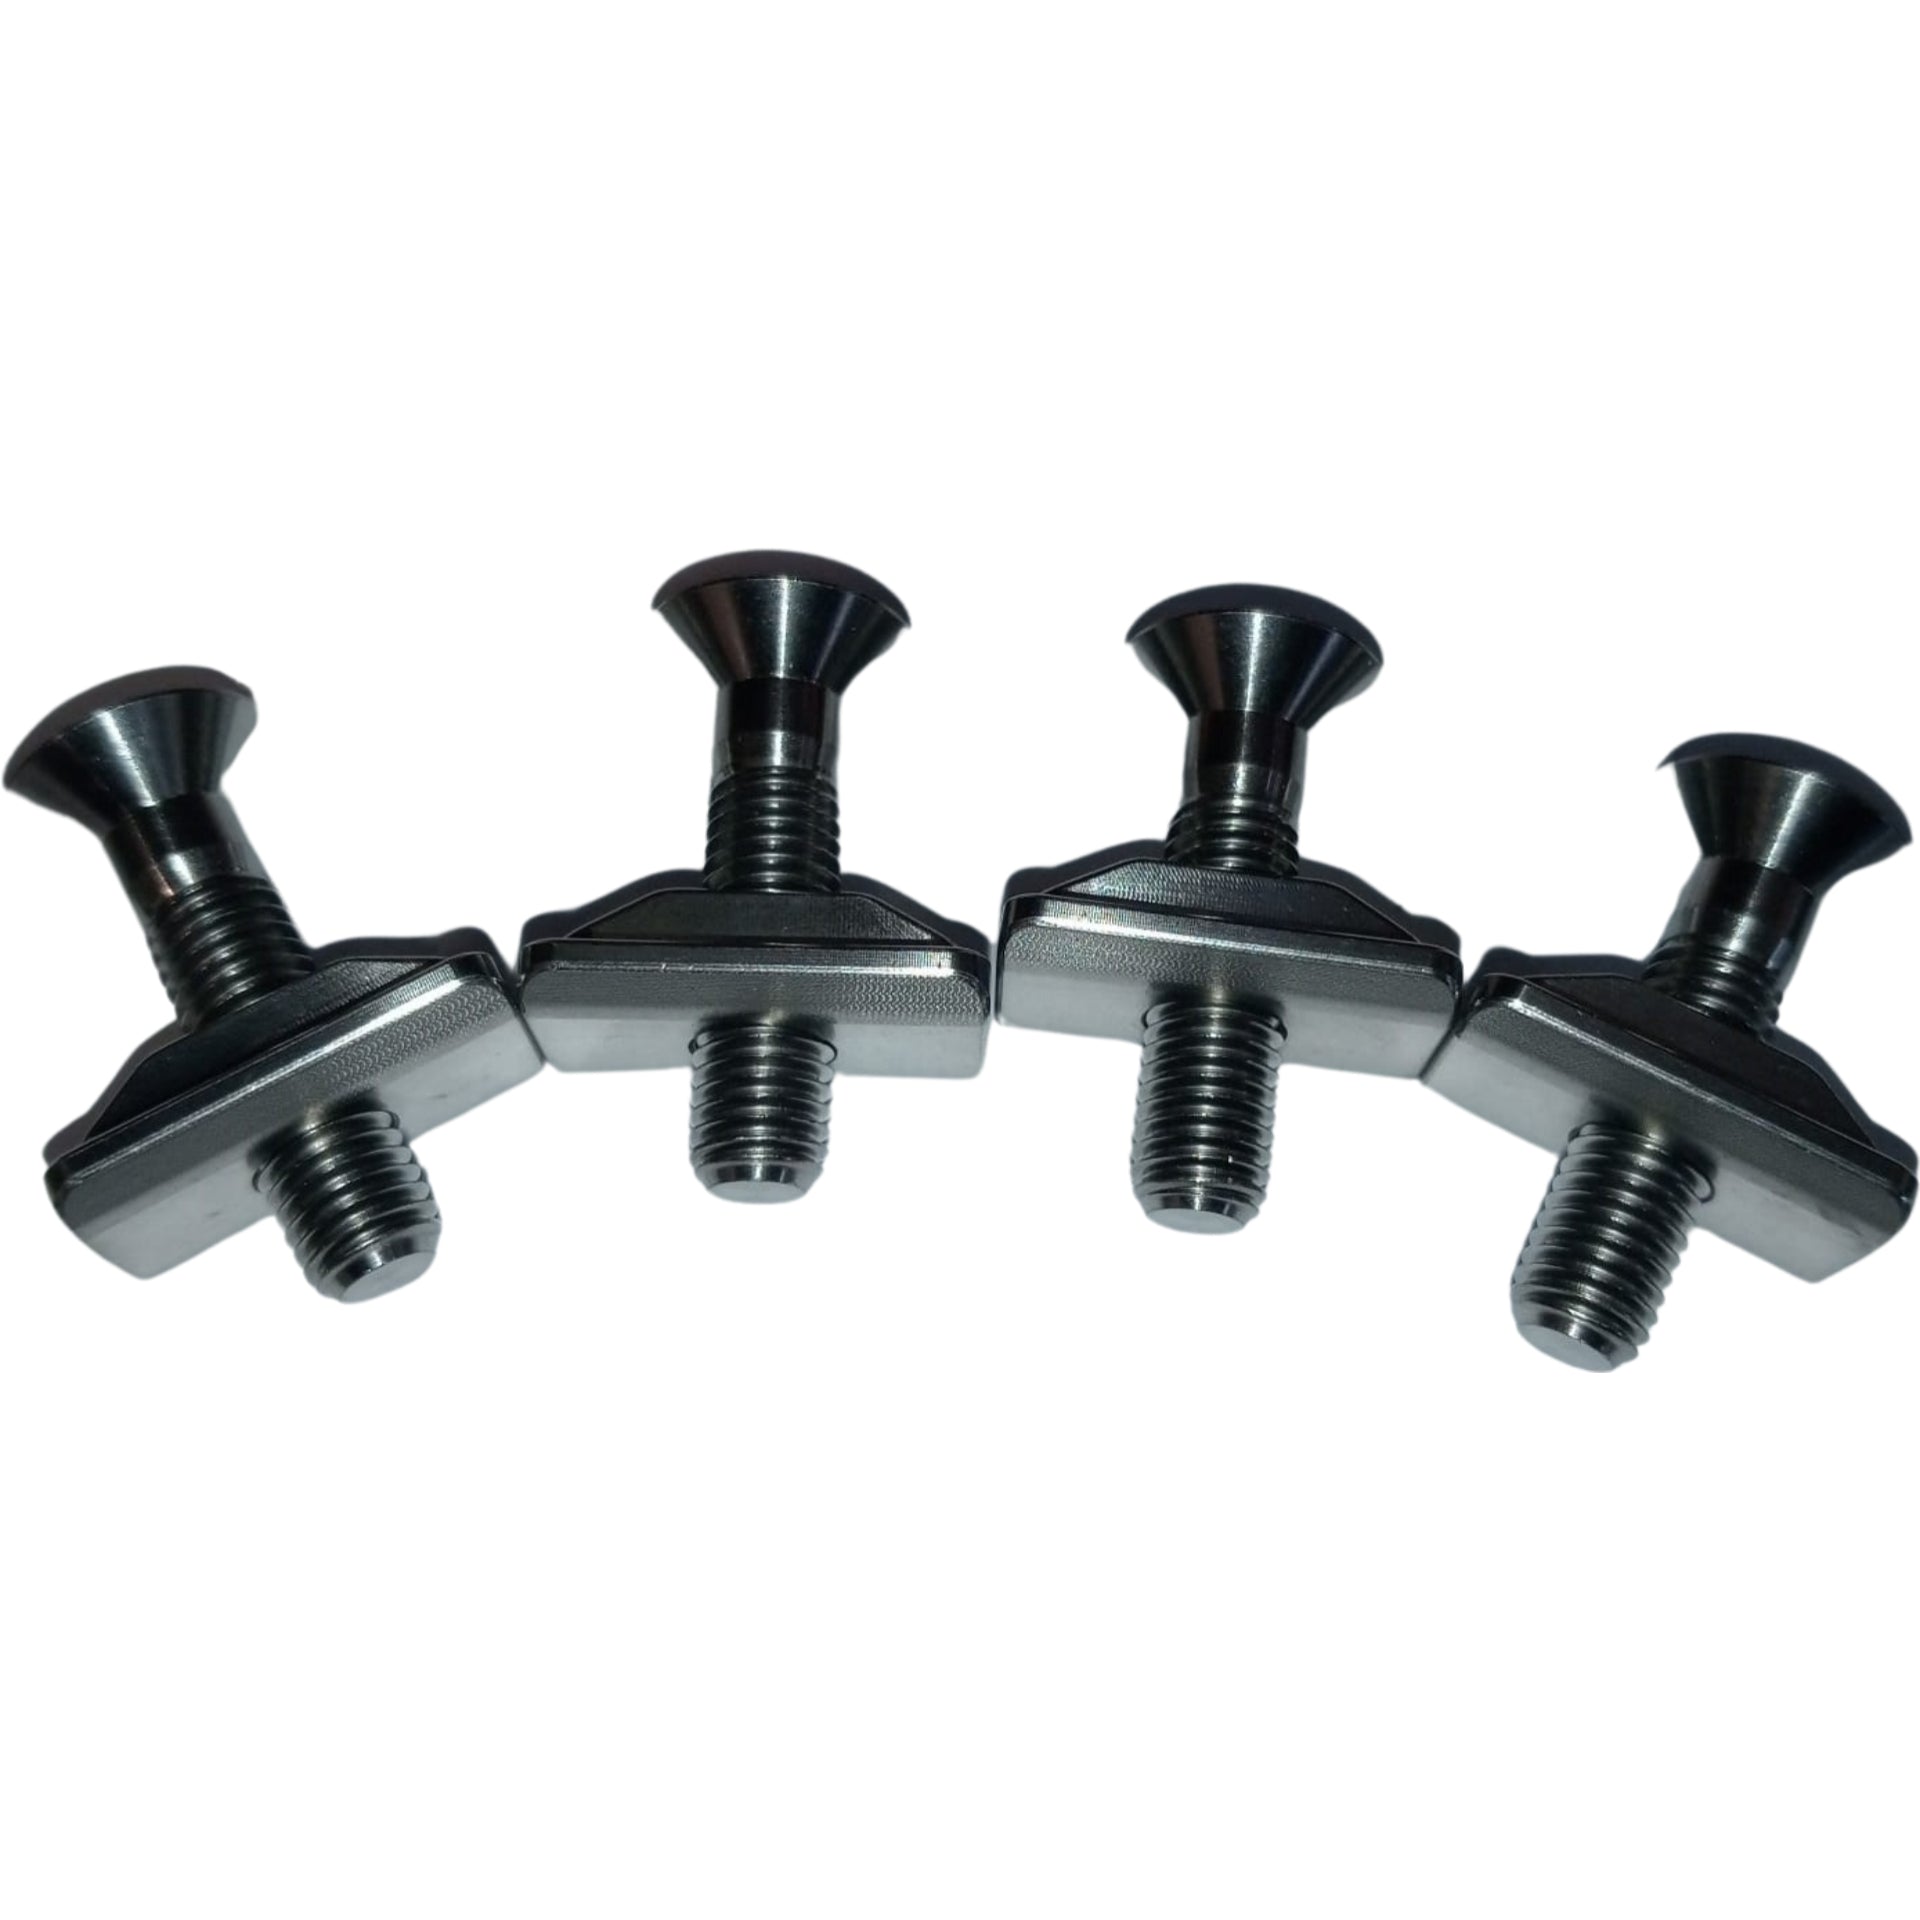 T Nut and Screw set M7 - Performance Mast ONLY